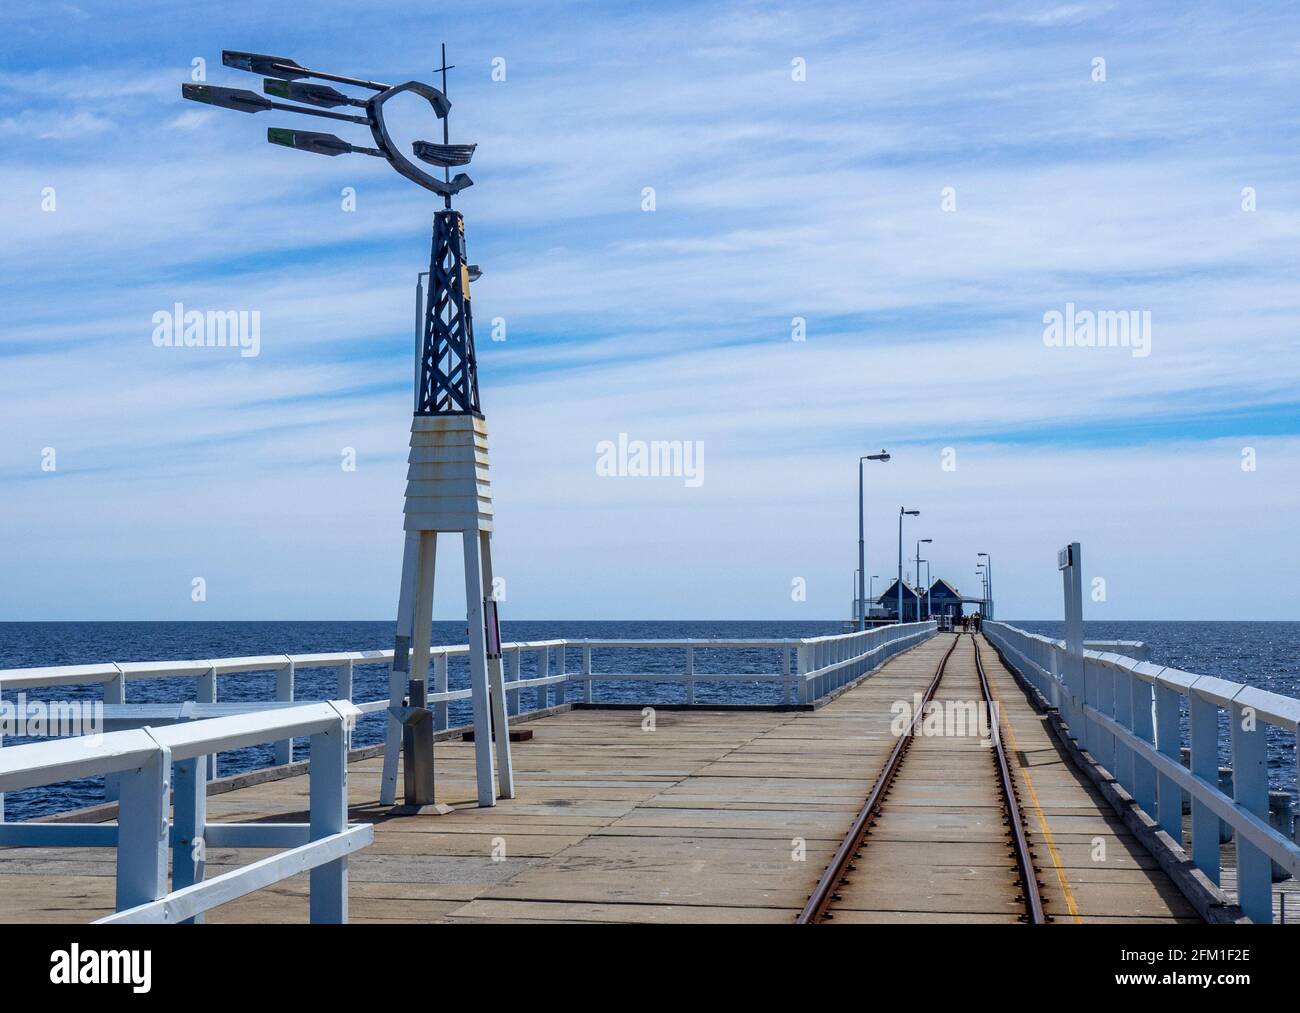 Directional wind vane at the end of Busselton Jetty the longest timber-piled jetty in the southern hemisphere, Western Australia Stock Photo